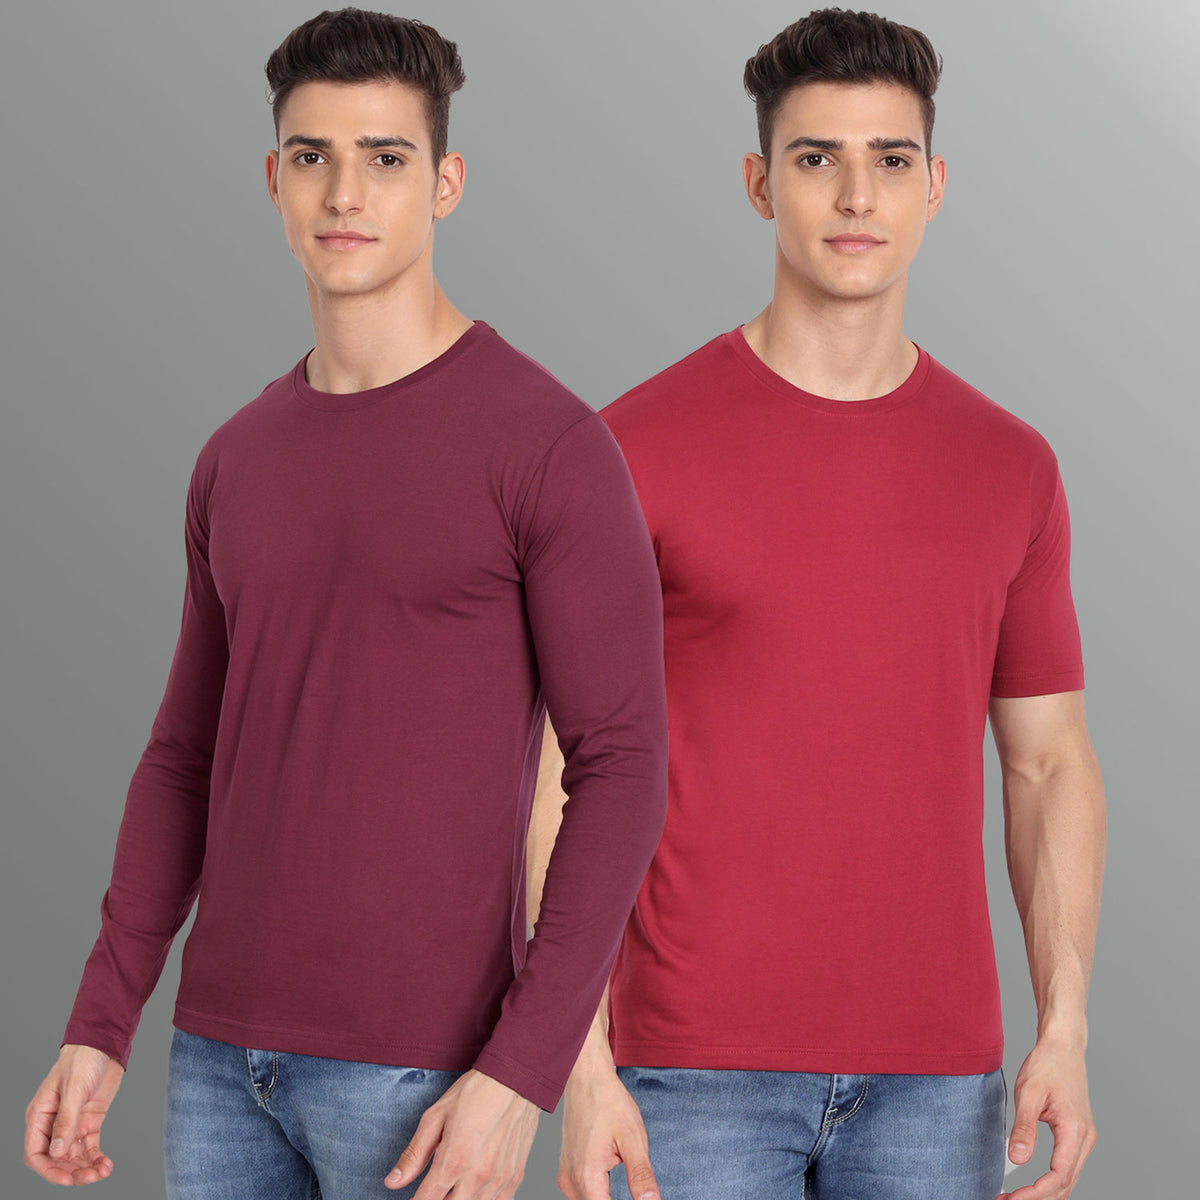 Full Sleeve Maroon And Half Sleeve Red T-shirt Combo For Men